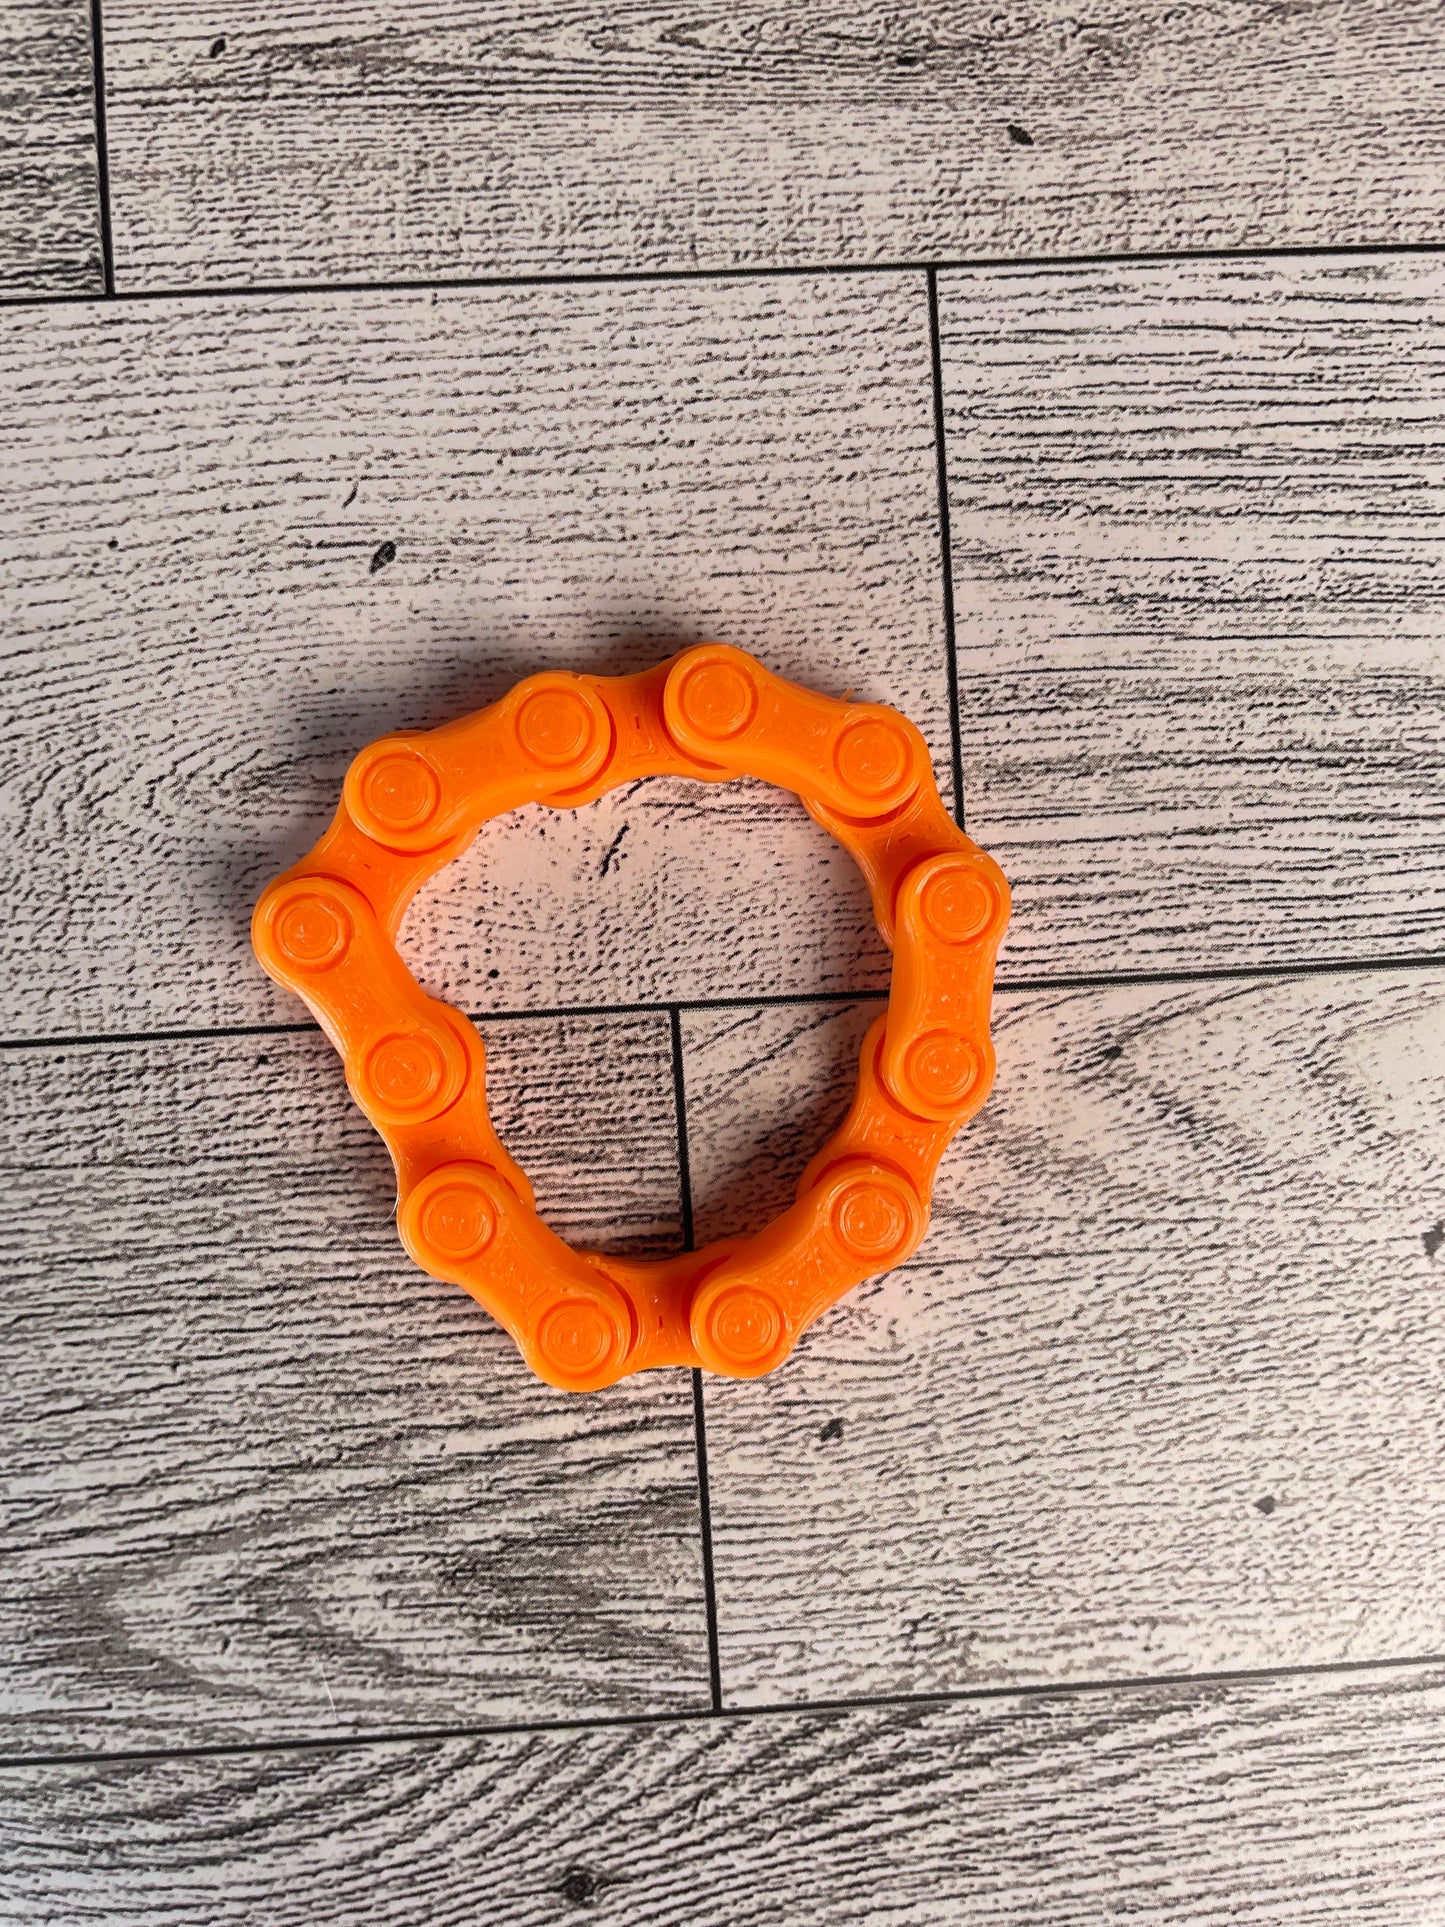 A orange chain link on a wood backdrop. The chain is arranged in a circle shape and there are six links.